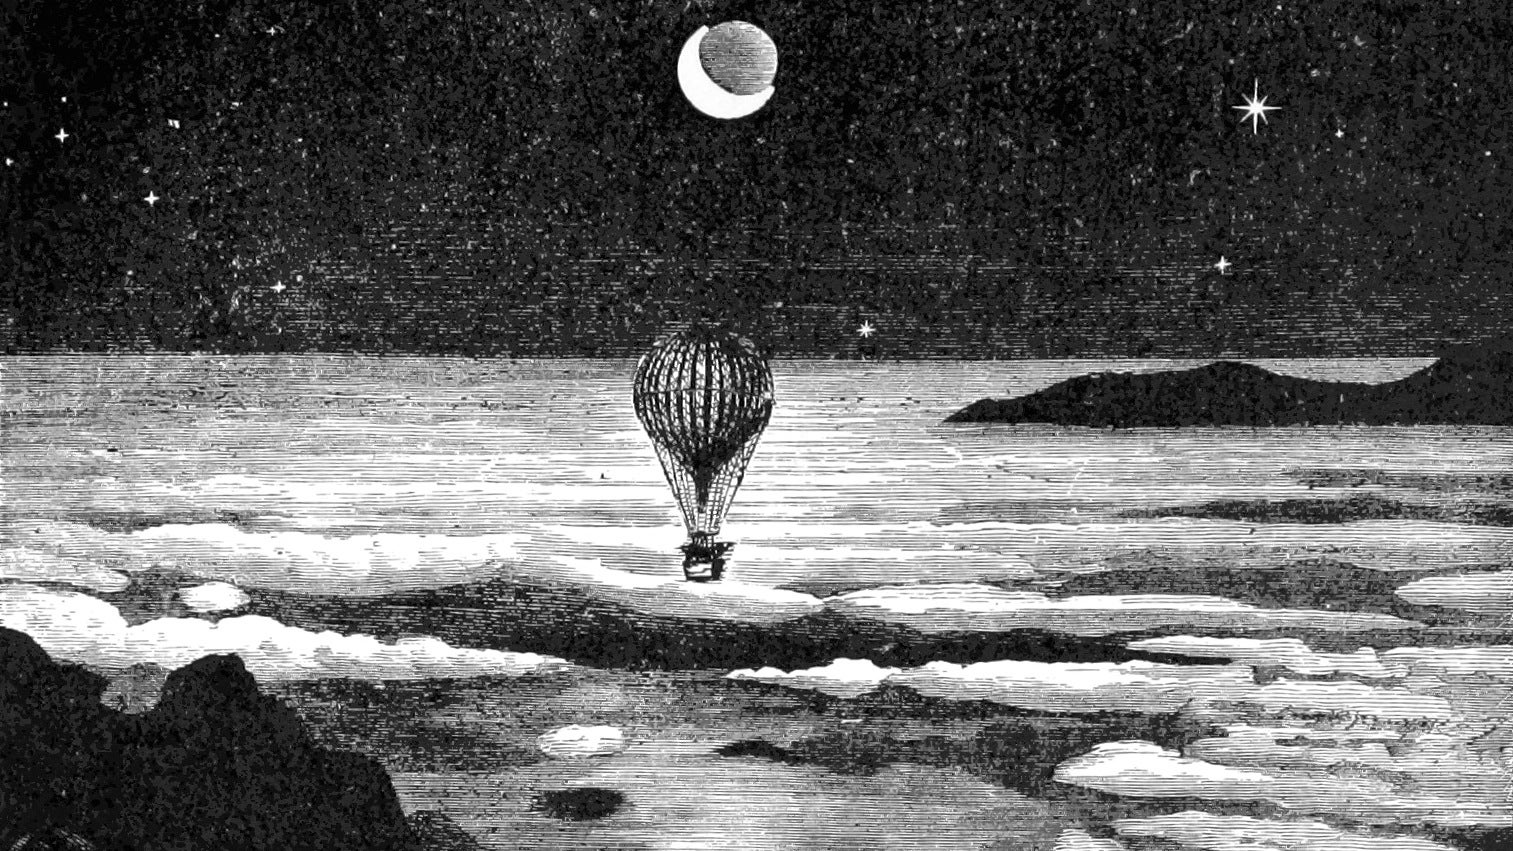 A hot air balloon rises above the clouds before a crescent moon in an illustration from 'The Half Hour Library of Travel, Nature and Science for young readers'.